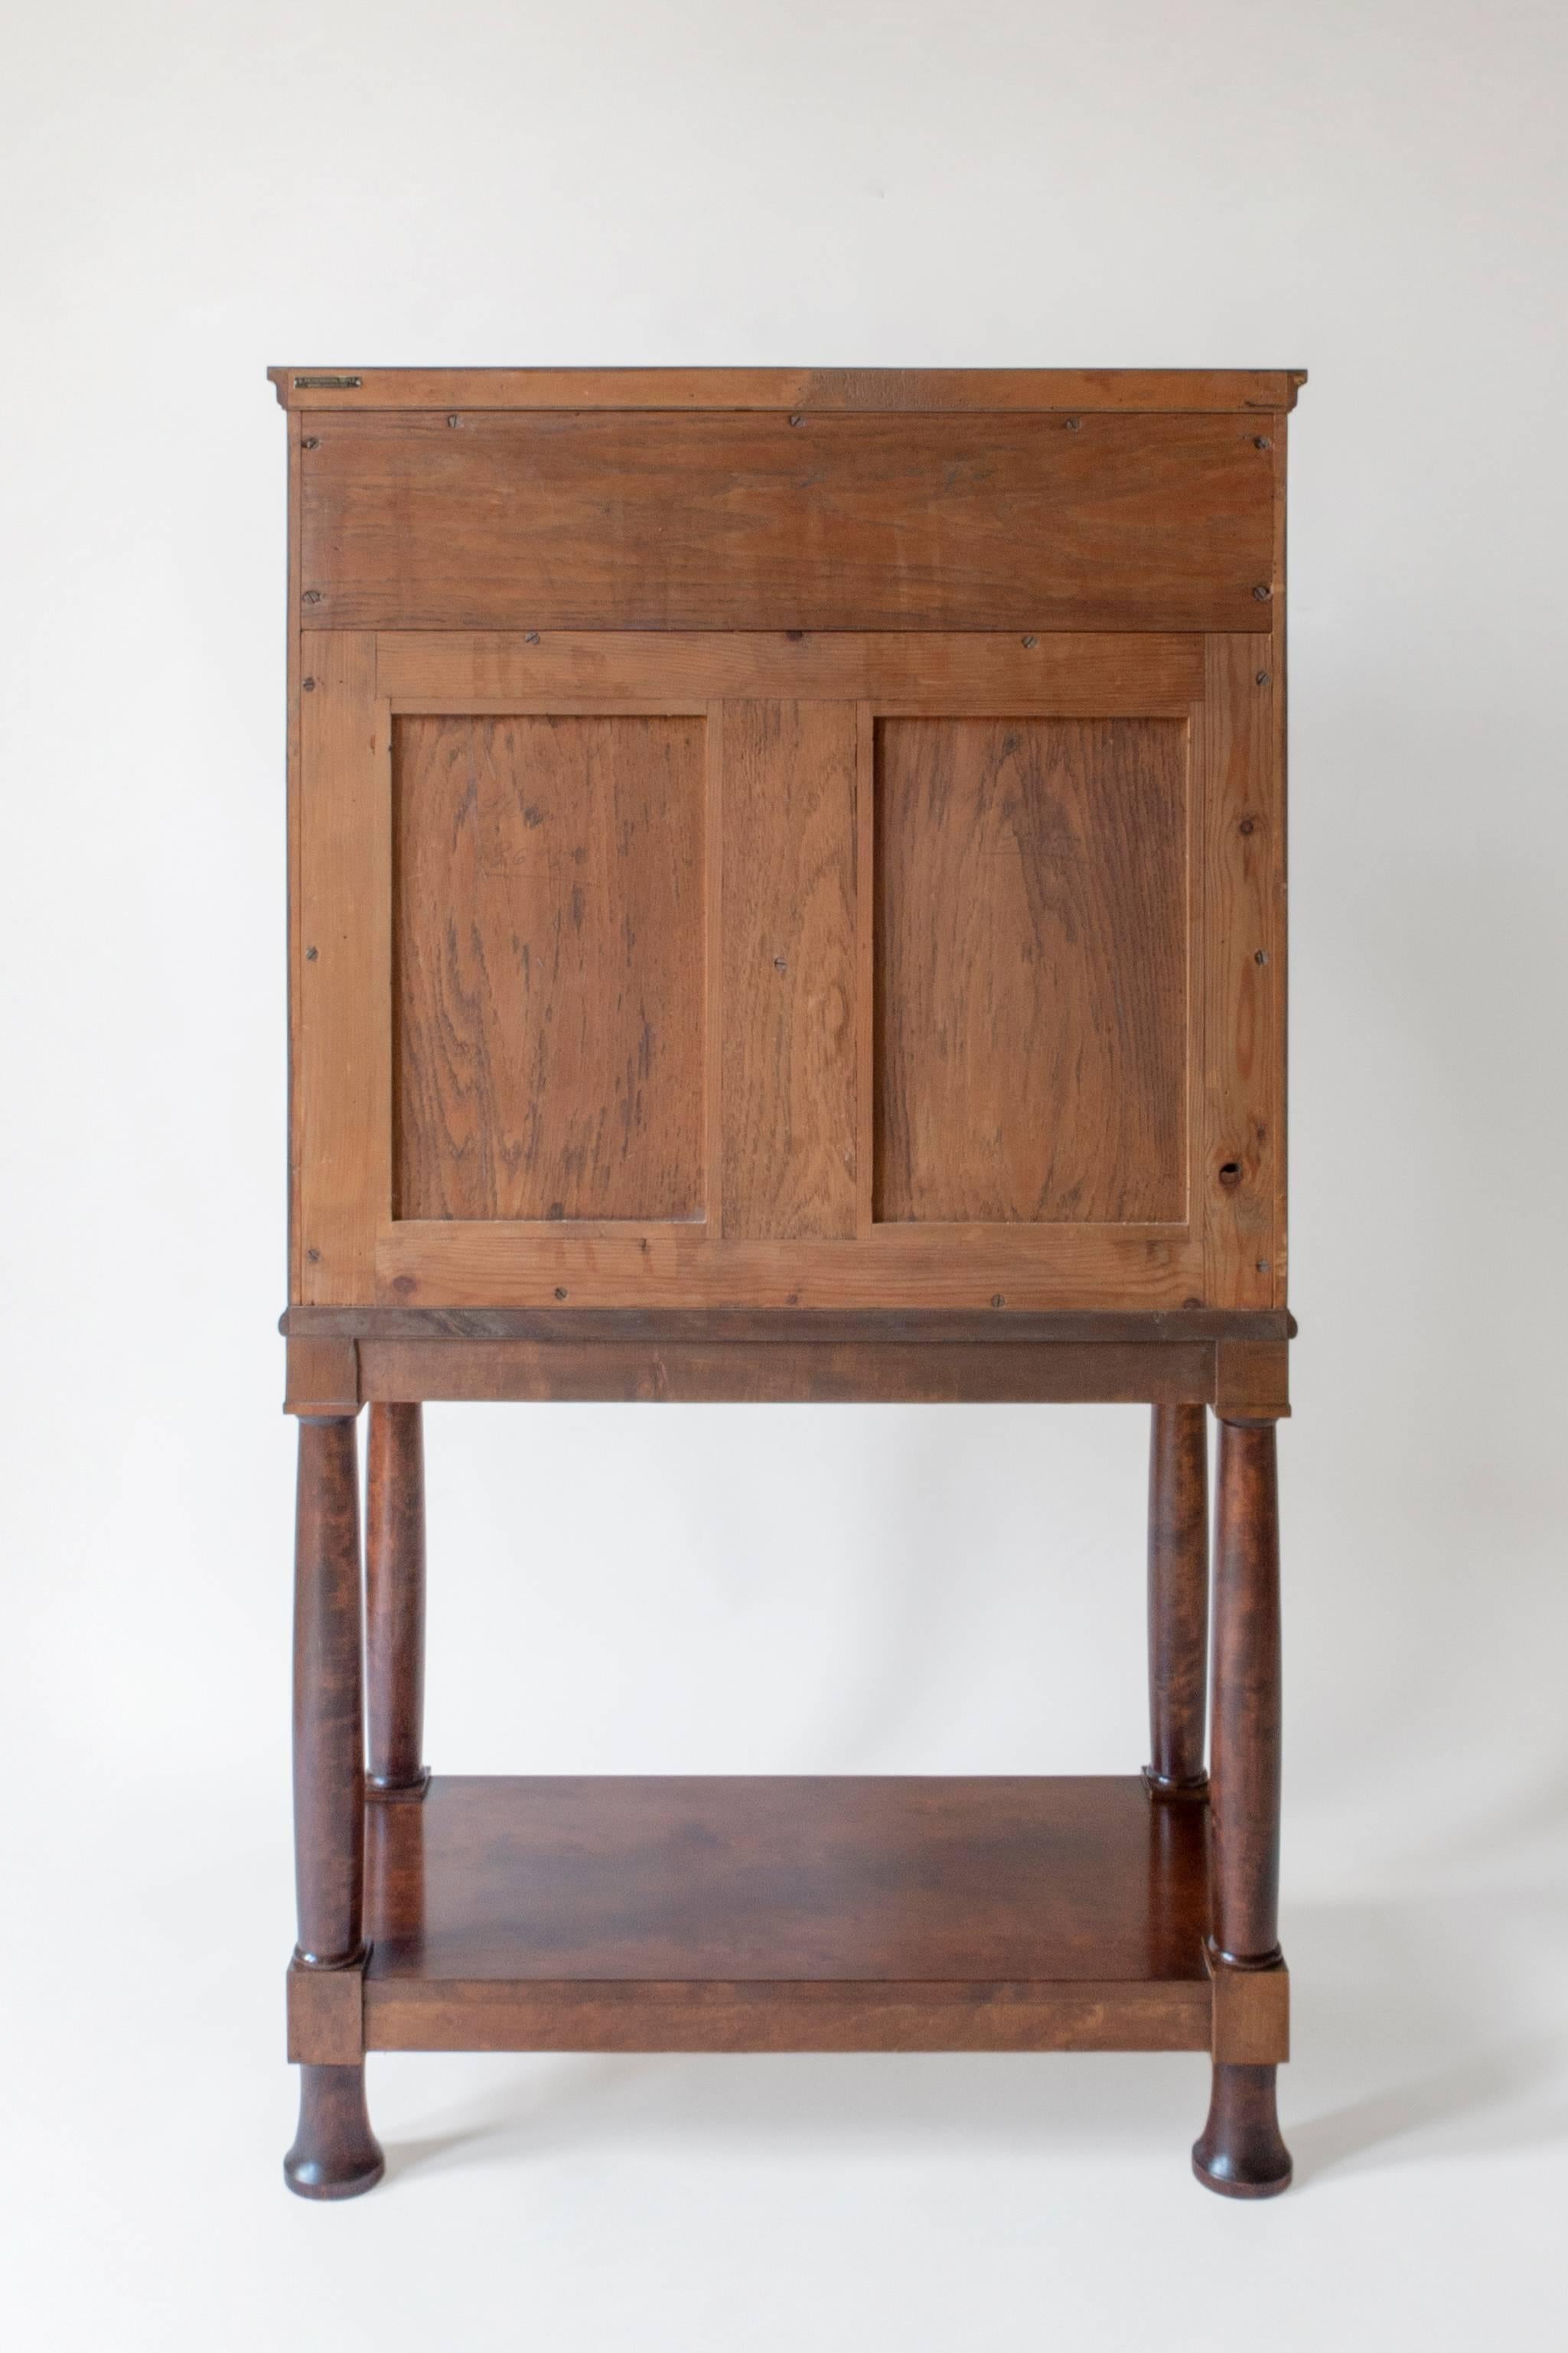 E. Pettersson, Rare Swedish Grace Period Quilted Birch Cabinet on Stand 1